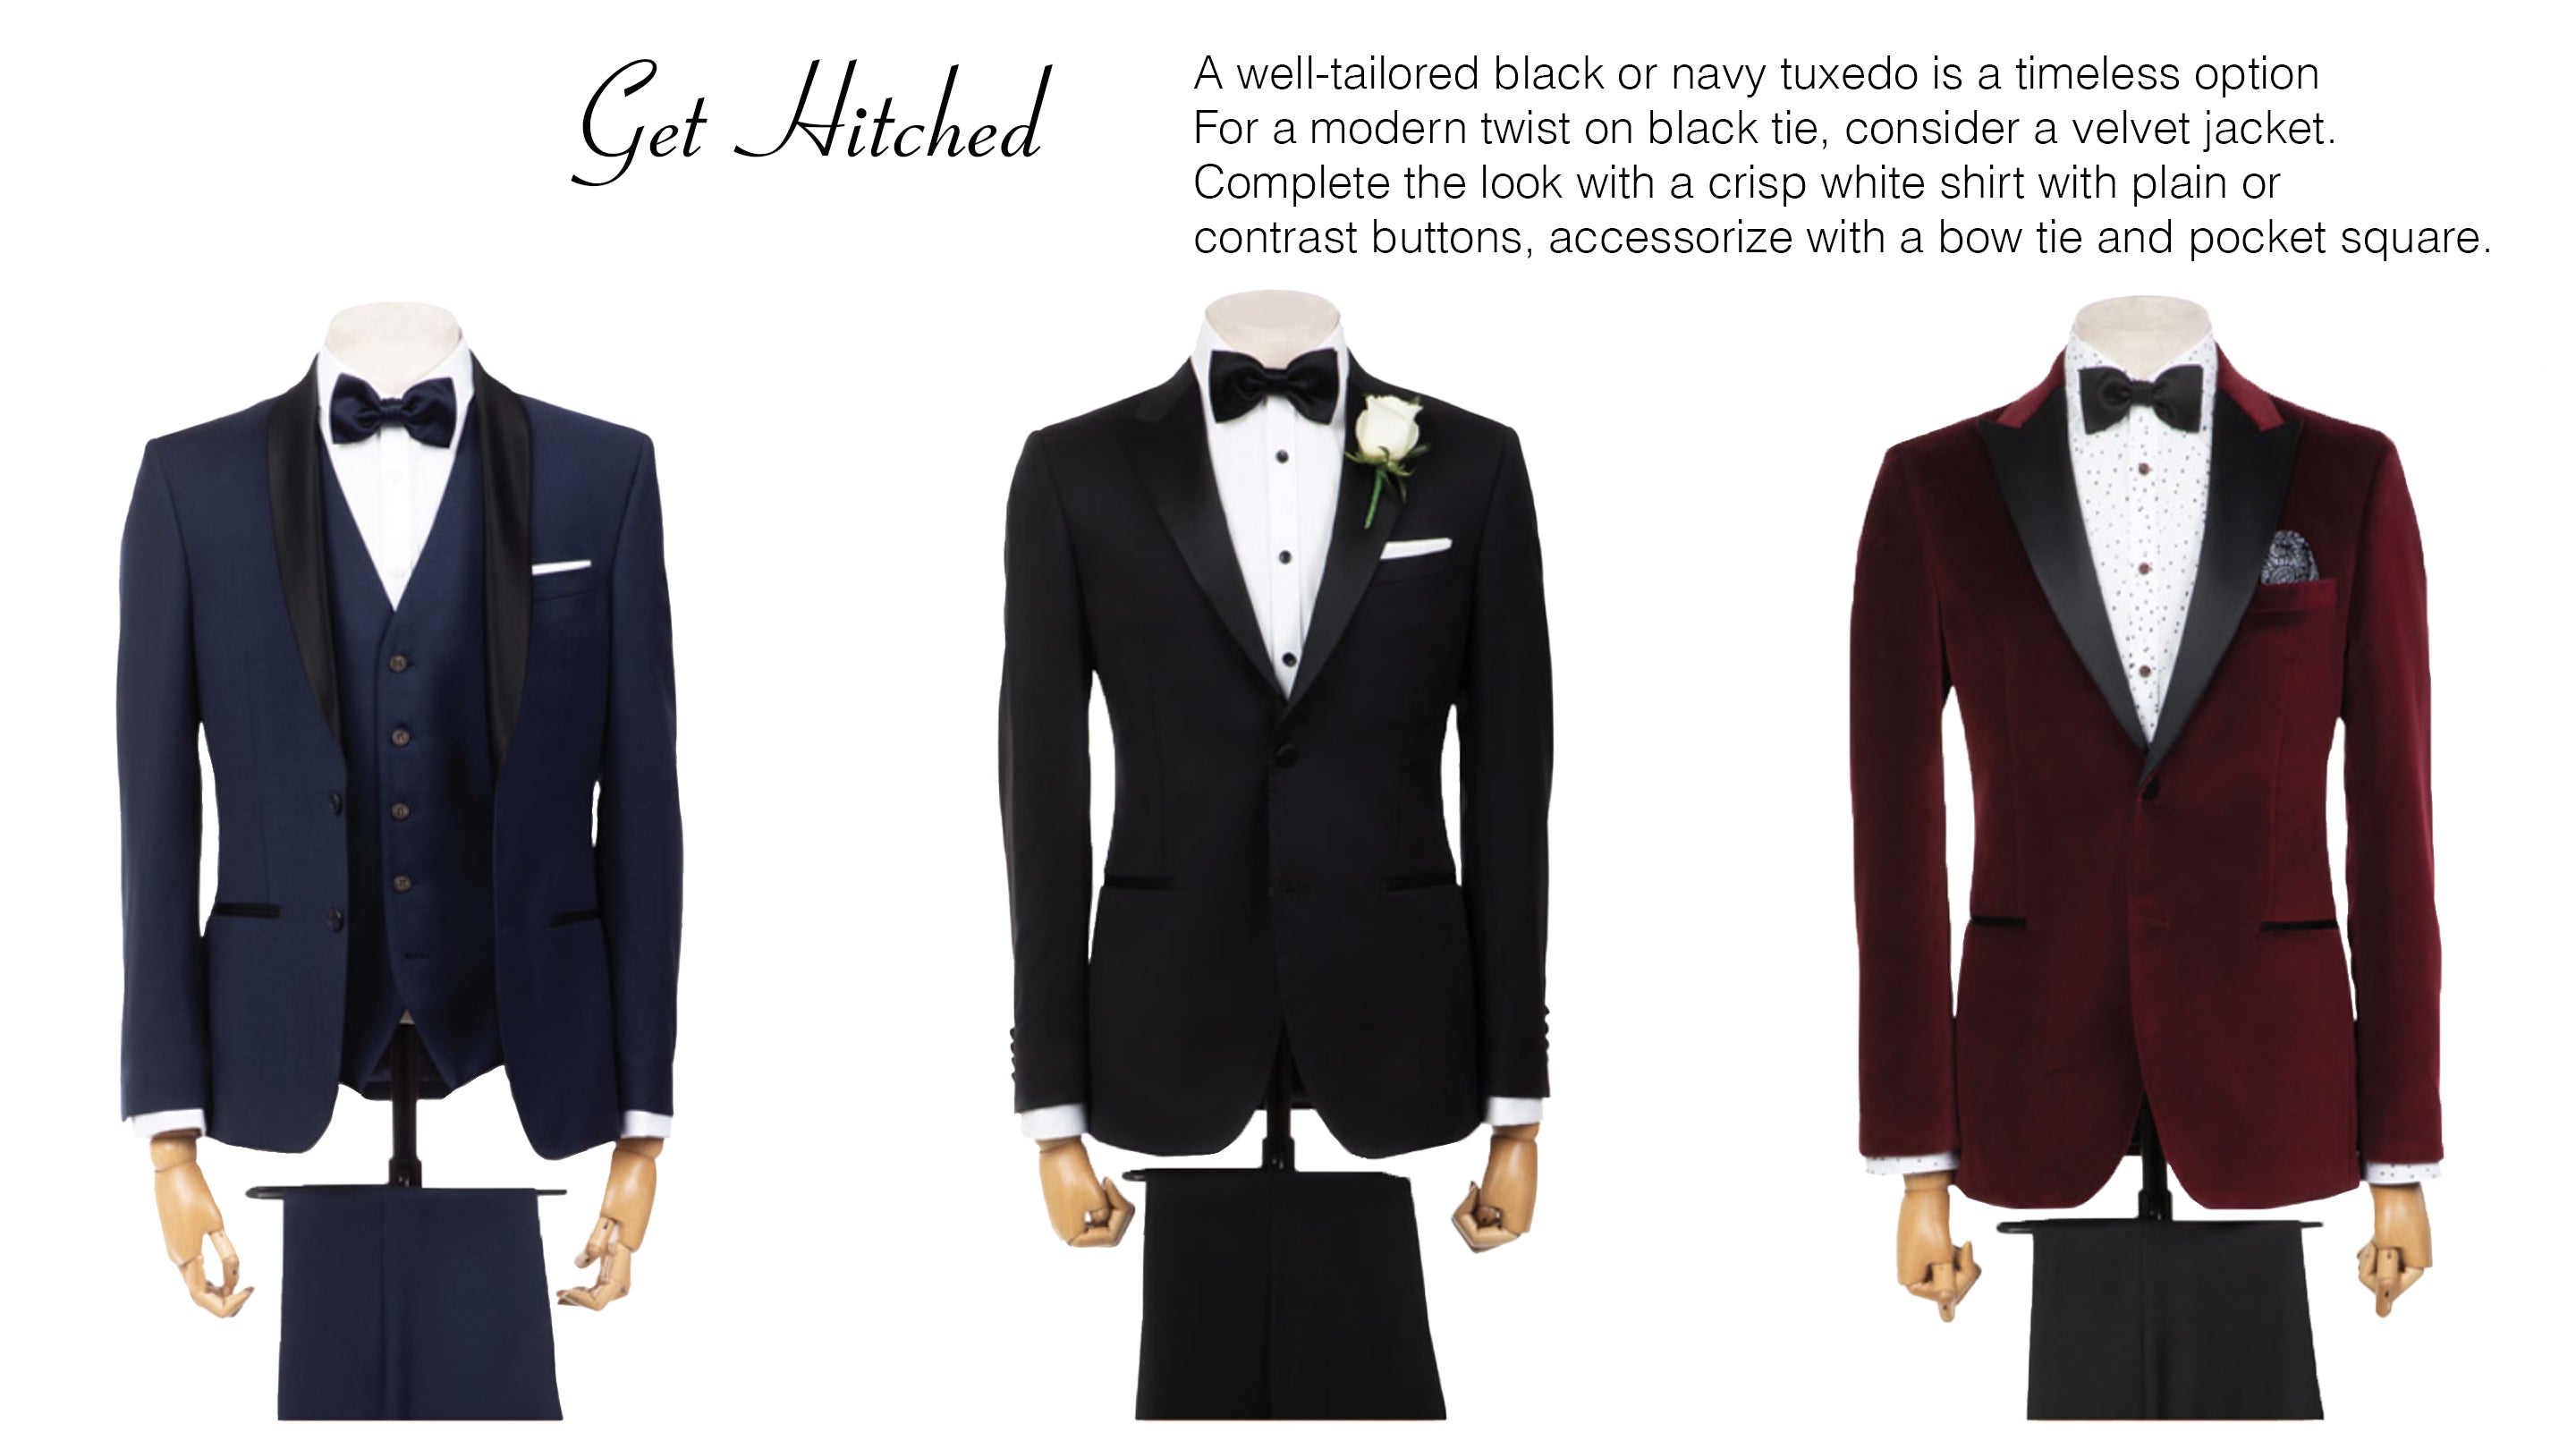 Gibson Formalwear Suits now at Harry's for Menswear